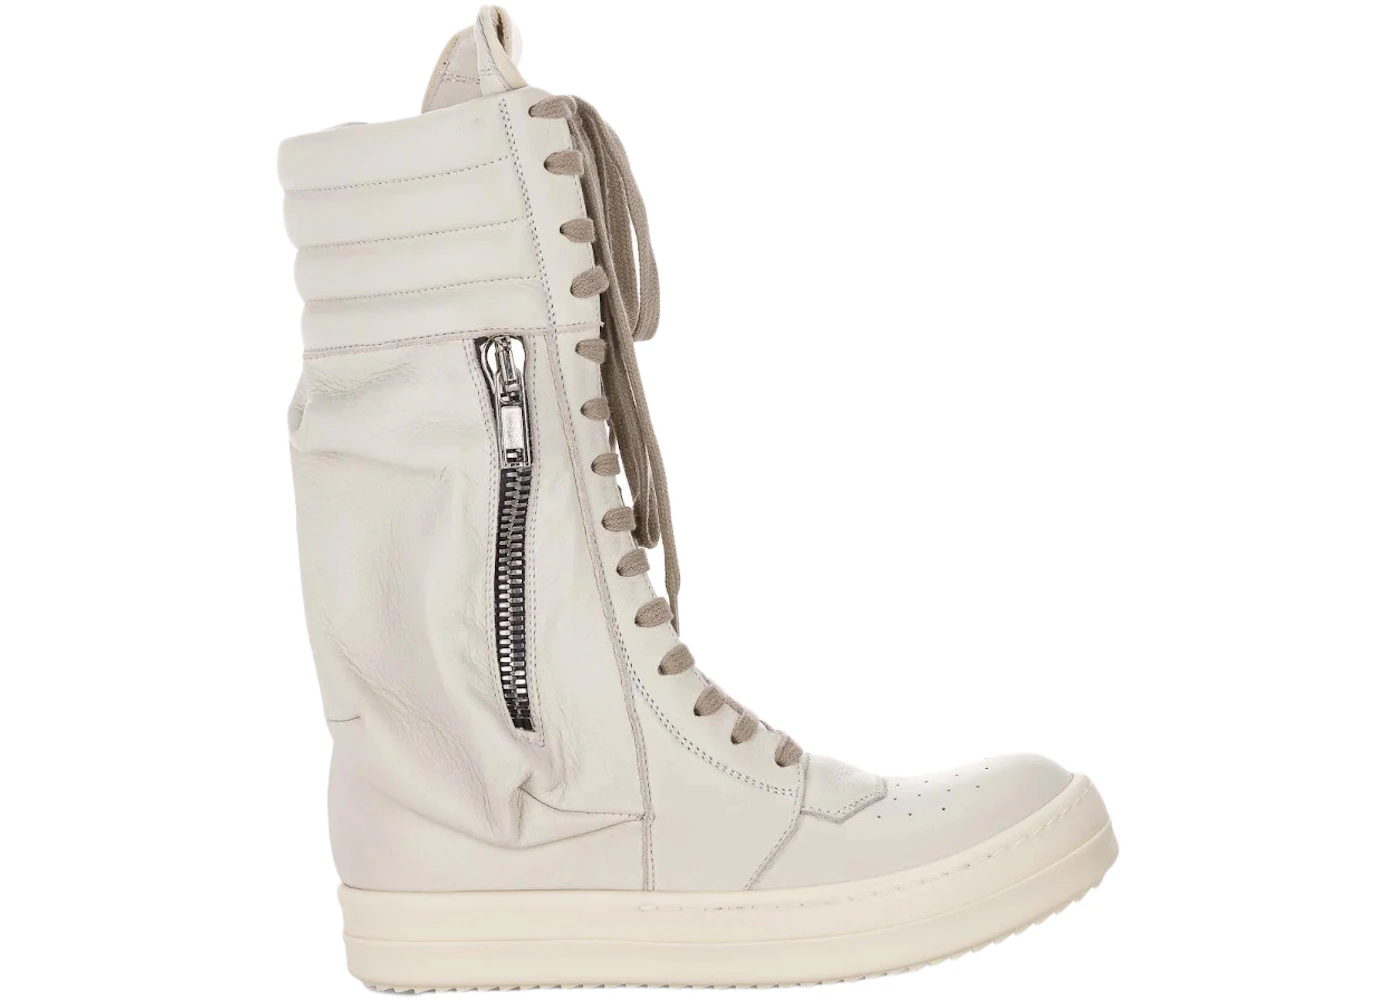 Rick Owens Cargo Basket Leather Boots Oyster Milk (Women's) - RP21S3899 ...